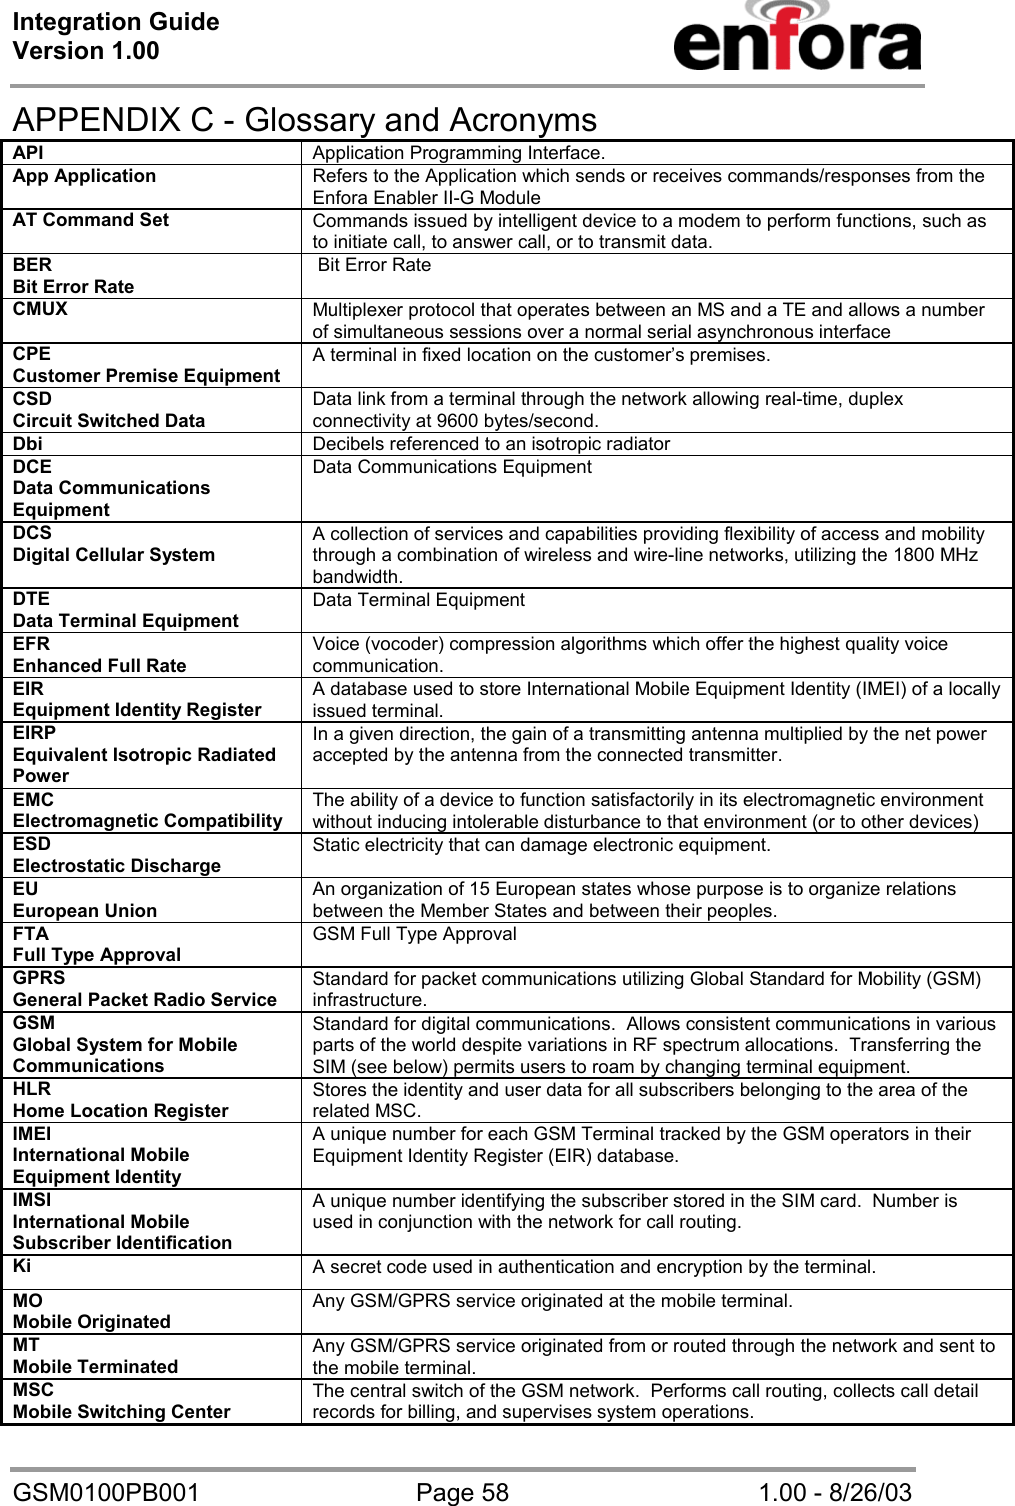 Integration Guide  Version 1.00   GSM0100PB001  Page 58  1.00 - 8/26/03 APPENDIX C - Glossary and Acronyms API  Application Programming Interface. App Application Refers to the Application which sends or receives commands/responses from the Enfora Enabler II-G Module AT Command Set  Commands issued by intelligent device to a modem to perform functions, such as to initiate call, to answer call, or to transmit data. BER Bit Error Rate  Bit Error Rate CMUX  Multiplexer protocol that operates between an MS and a TE and allows a number of simultaneous sessions over a normal serial asynchronous interface CPE Customer Premise Equipment A terminal in fixed location on the customer’s premises. CSD Circuit Switched Data Data link from a terminal through the network allowing real-time, duplex connectivity at 9600 bytes/second. Dbi Decibels referenced to an isotropic radiator DCE Data Communications Equipment Data Communications Equipment DCS Digital Cellular System A collection of services and capabilities providing flexibility of access and mobility through a combination of wireless and wire-line networks, utilizing the 1800 MHz bandwidth. DTE Data Terminal Equipment Data Terminal Equipment EFR Enhanced Full Rate Voice (vocoder) compression algorithms which offer the highest quality voice communication. EIR Equipment Identity Register A database used to store International Mobile Equipment Identity (IMEI) of a locally issued terminal. EIRP Equivalent Isotropic Radiated Power In a given direction, the gain of a transmitting antenna multiplied by the net power accepted by the antenna from the connected transmitter. EMC Electromagnetic Compatibility The ability of a device to function satisfactorily in its electromagnetic environment without inducing intolerable disturbance to that environment (or to other devices) ESD Electrostatic Discharge Static electricity that can damage electronic equipment. EU European Union An organization of 15 European states whose purpose is to organize relations between the Member States and between their peoples. FTA Full Type Approval GSM Full Type Approval GPRS General Packet Radio Service Standard for packet communications utilizing Global Standard for Mobility (GSM) infrastructure. GSM Global System for Mobile Communications Standard for digital communications.  Allows consistent communications in various parts of the world despite variations in RF spectrum allocations.  Transferring the SIM (see below) permits users to roam by changing terminal equipment. HLR Home Location Register Stores the identity and user data for all subscribers belonging to the area of the related MSC.  IMEI International Mobile Equipment Identity A unique number for each GSM Terminal tracked by the GSM operators in their Equipment Identity Register (EIR) database. IMSI International Mobile Subscriber Identification A unique number identifying the subscriber stored in the SIM card.  Number is used in conjunction with the network for call routing. Ki A secret code used in authentication and encryption by the terminal. MO Mobile Originated Any GSM/GPRS service originated at the mobile terminal. MT Mobile Terminated Any GSM/GPRS service originated from or routed through the network and sent to the mobile terminal. MSC Mobile Switching Center The central switch of the GSM network.  Performs call routing, collects call detail records for billing, and supervises system operations. 